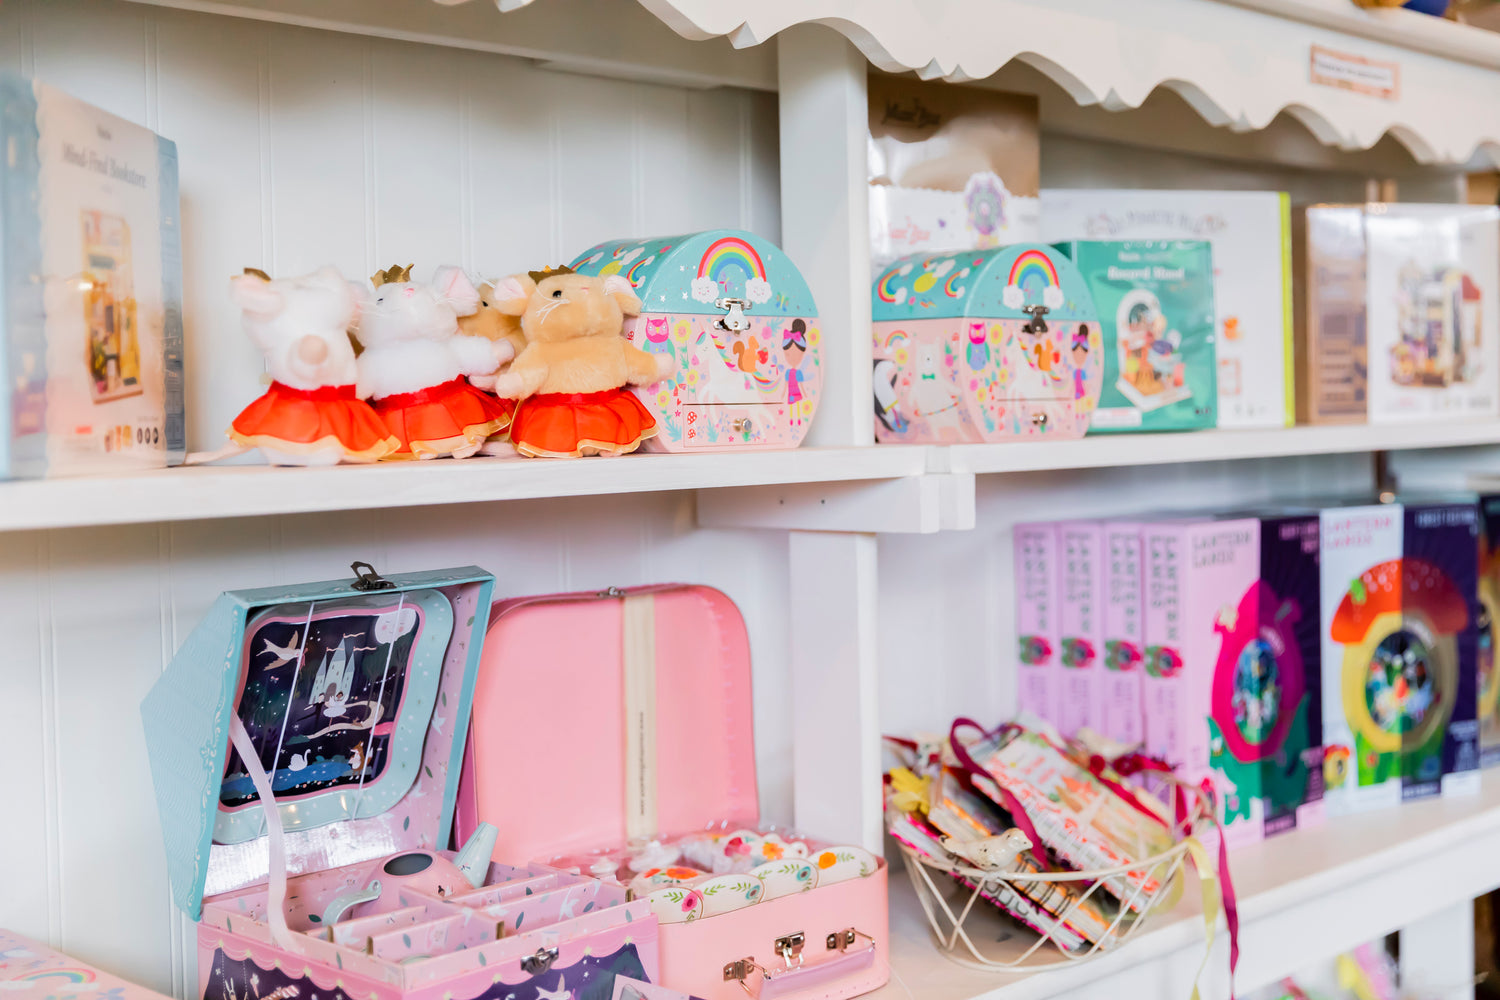 puzzles, little stuffed animals for children and lunch box styled containers on a shelf